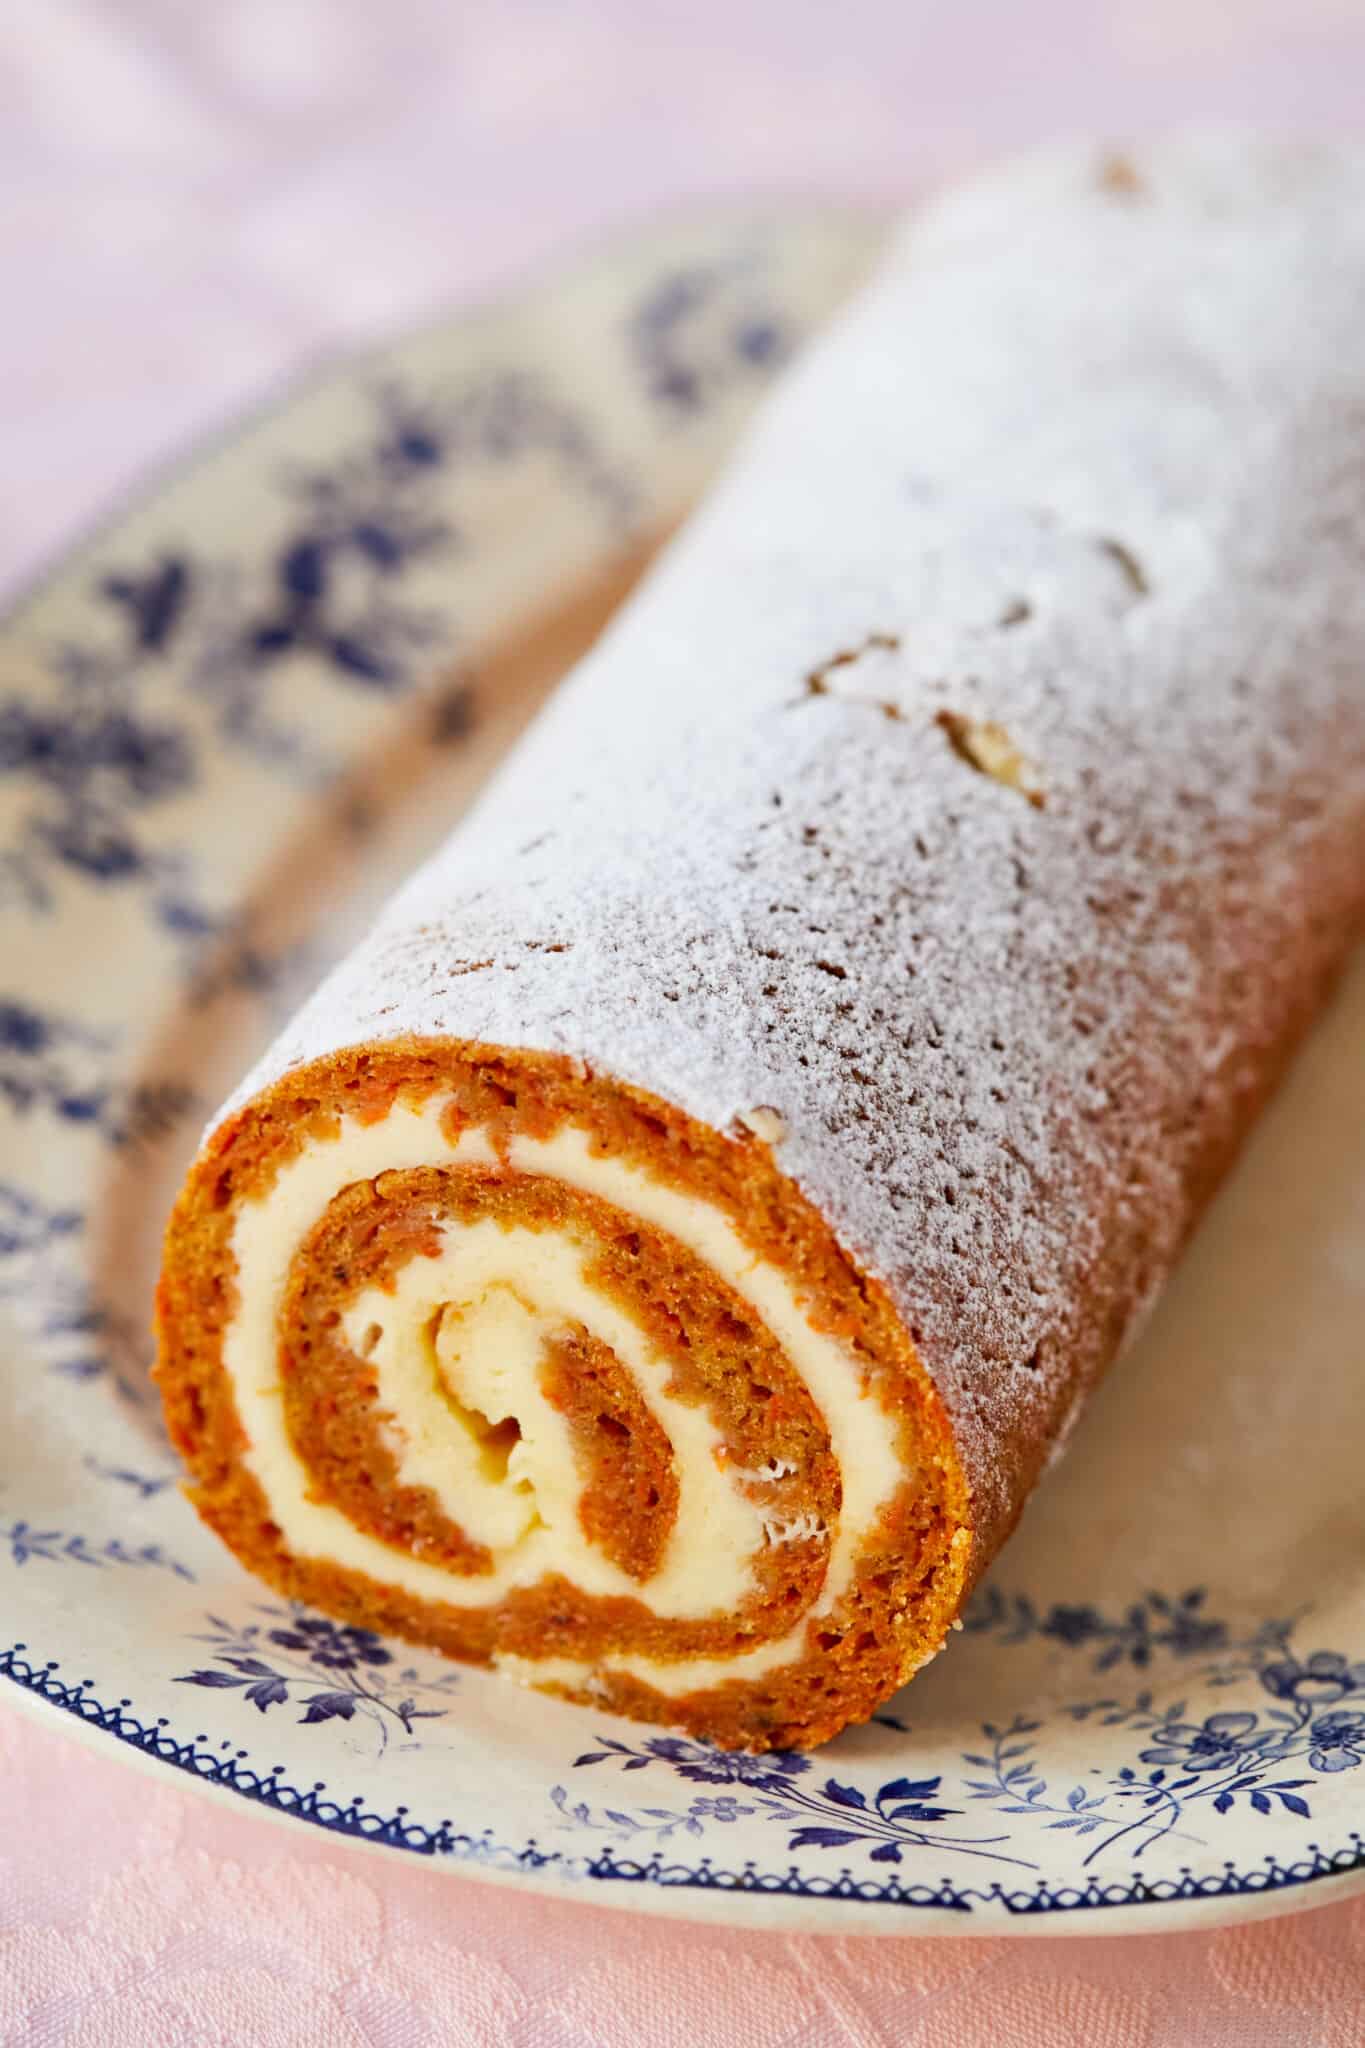 A log of Carrot Cake Cheesecake Roll is served on a floral platter. The cake is moist and soft, stuffed with creamy and tangy cream cheese filling and dusted with powdered sugar. The orange cake and milky white color add a gorgeous color contrast.